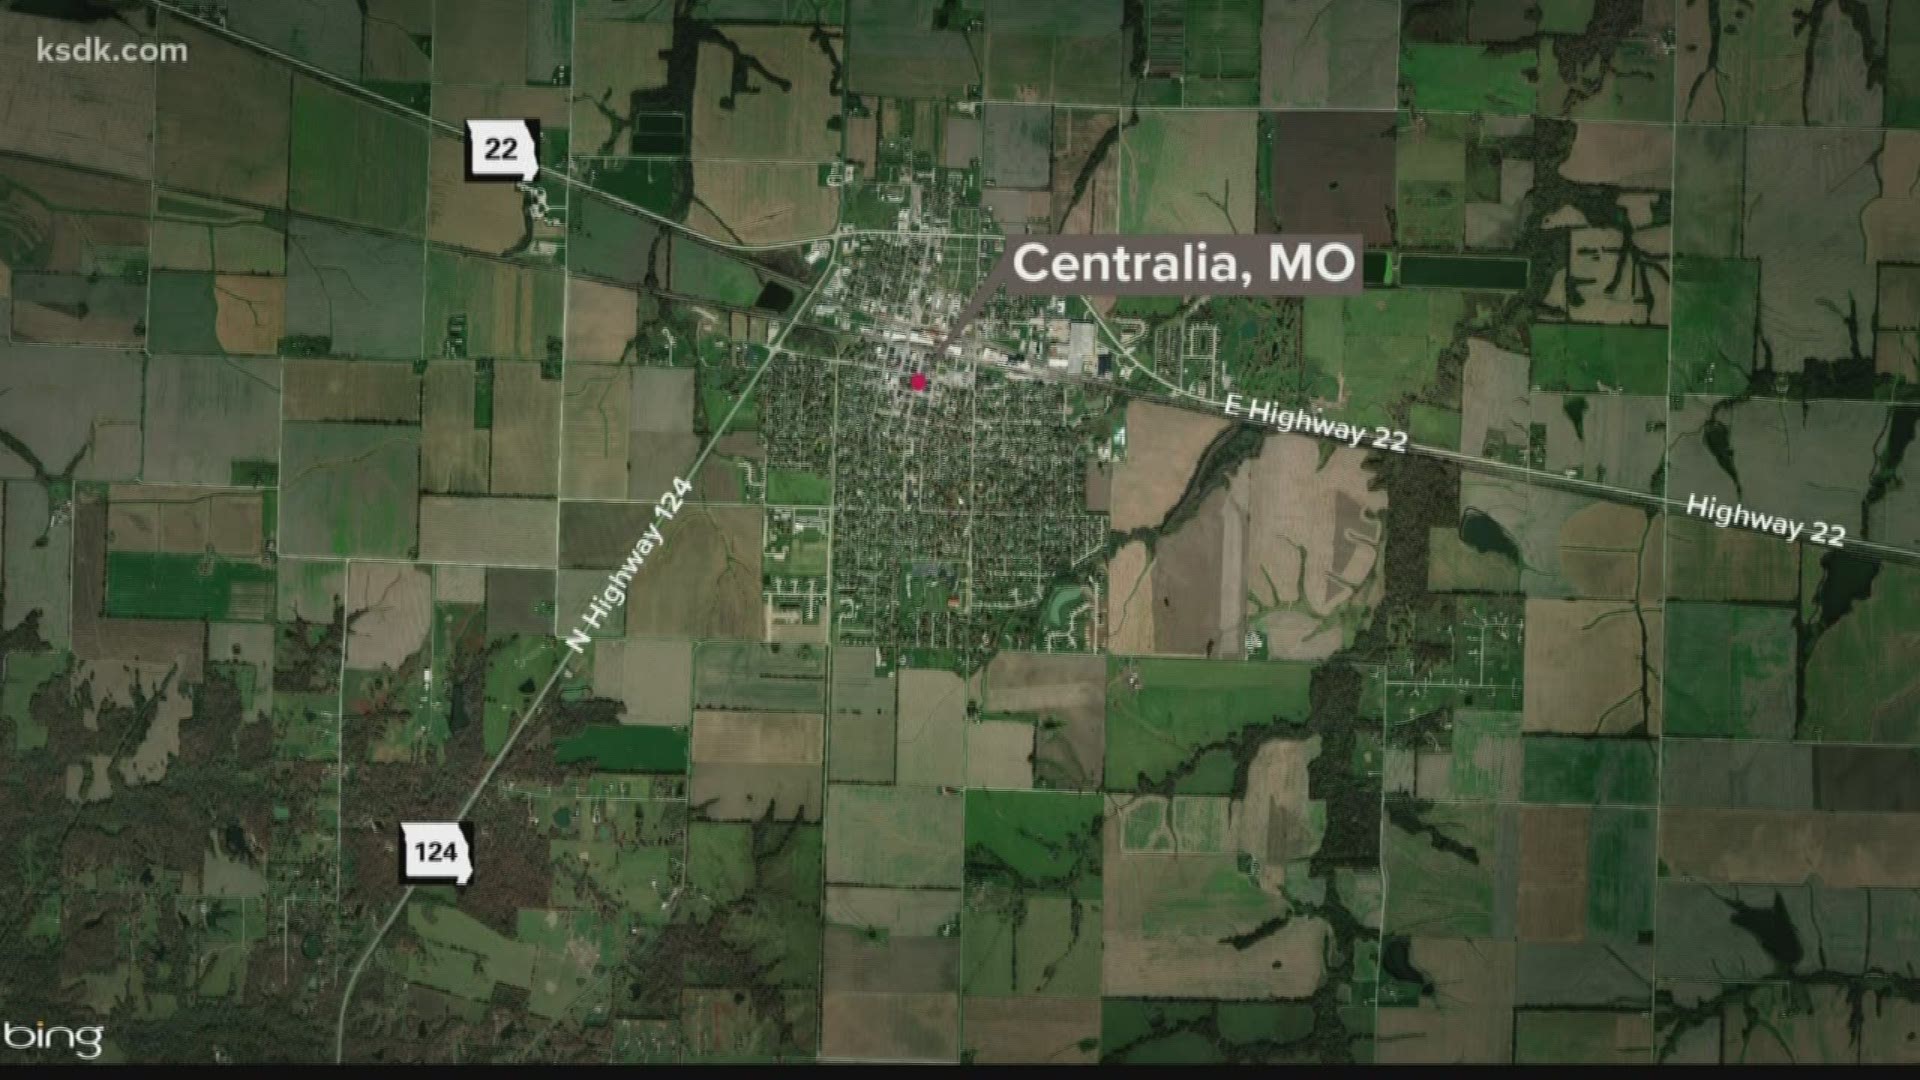 The 41-year-old man is a police officer with the Centralia Police Department.